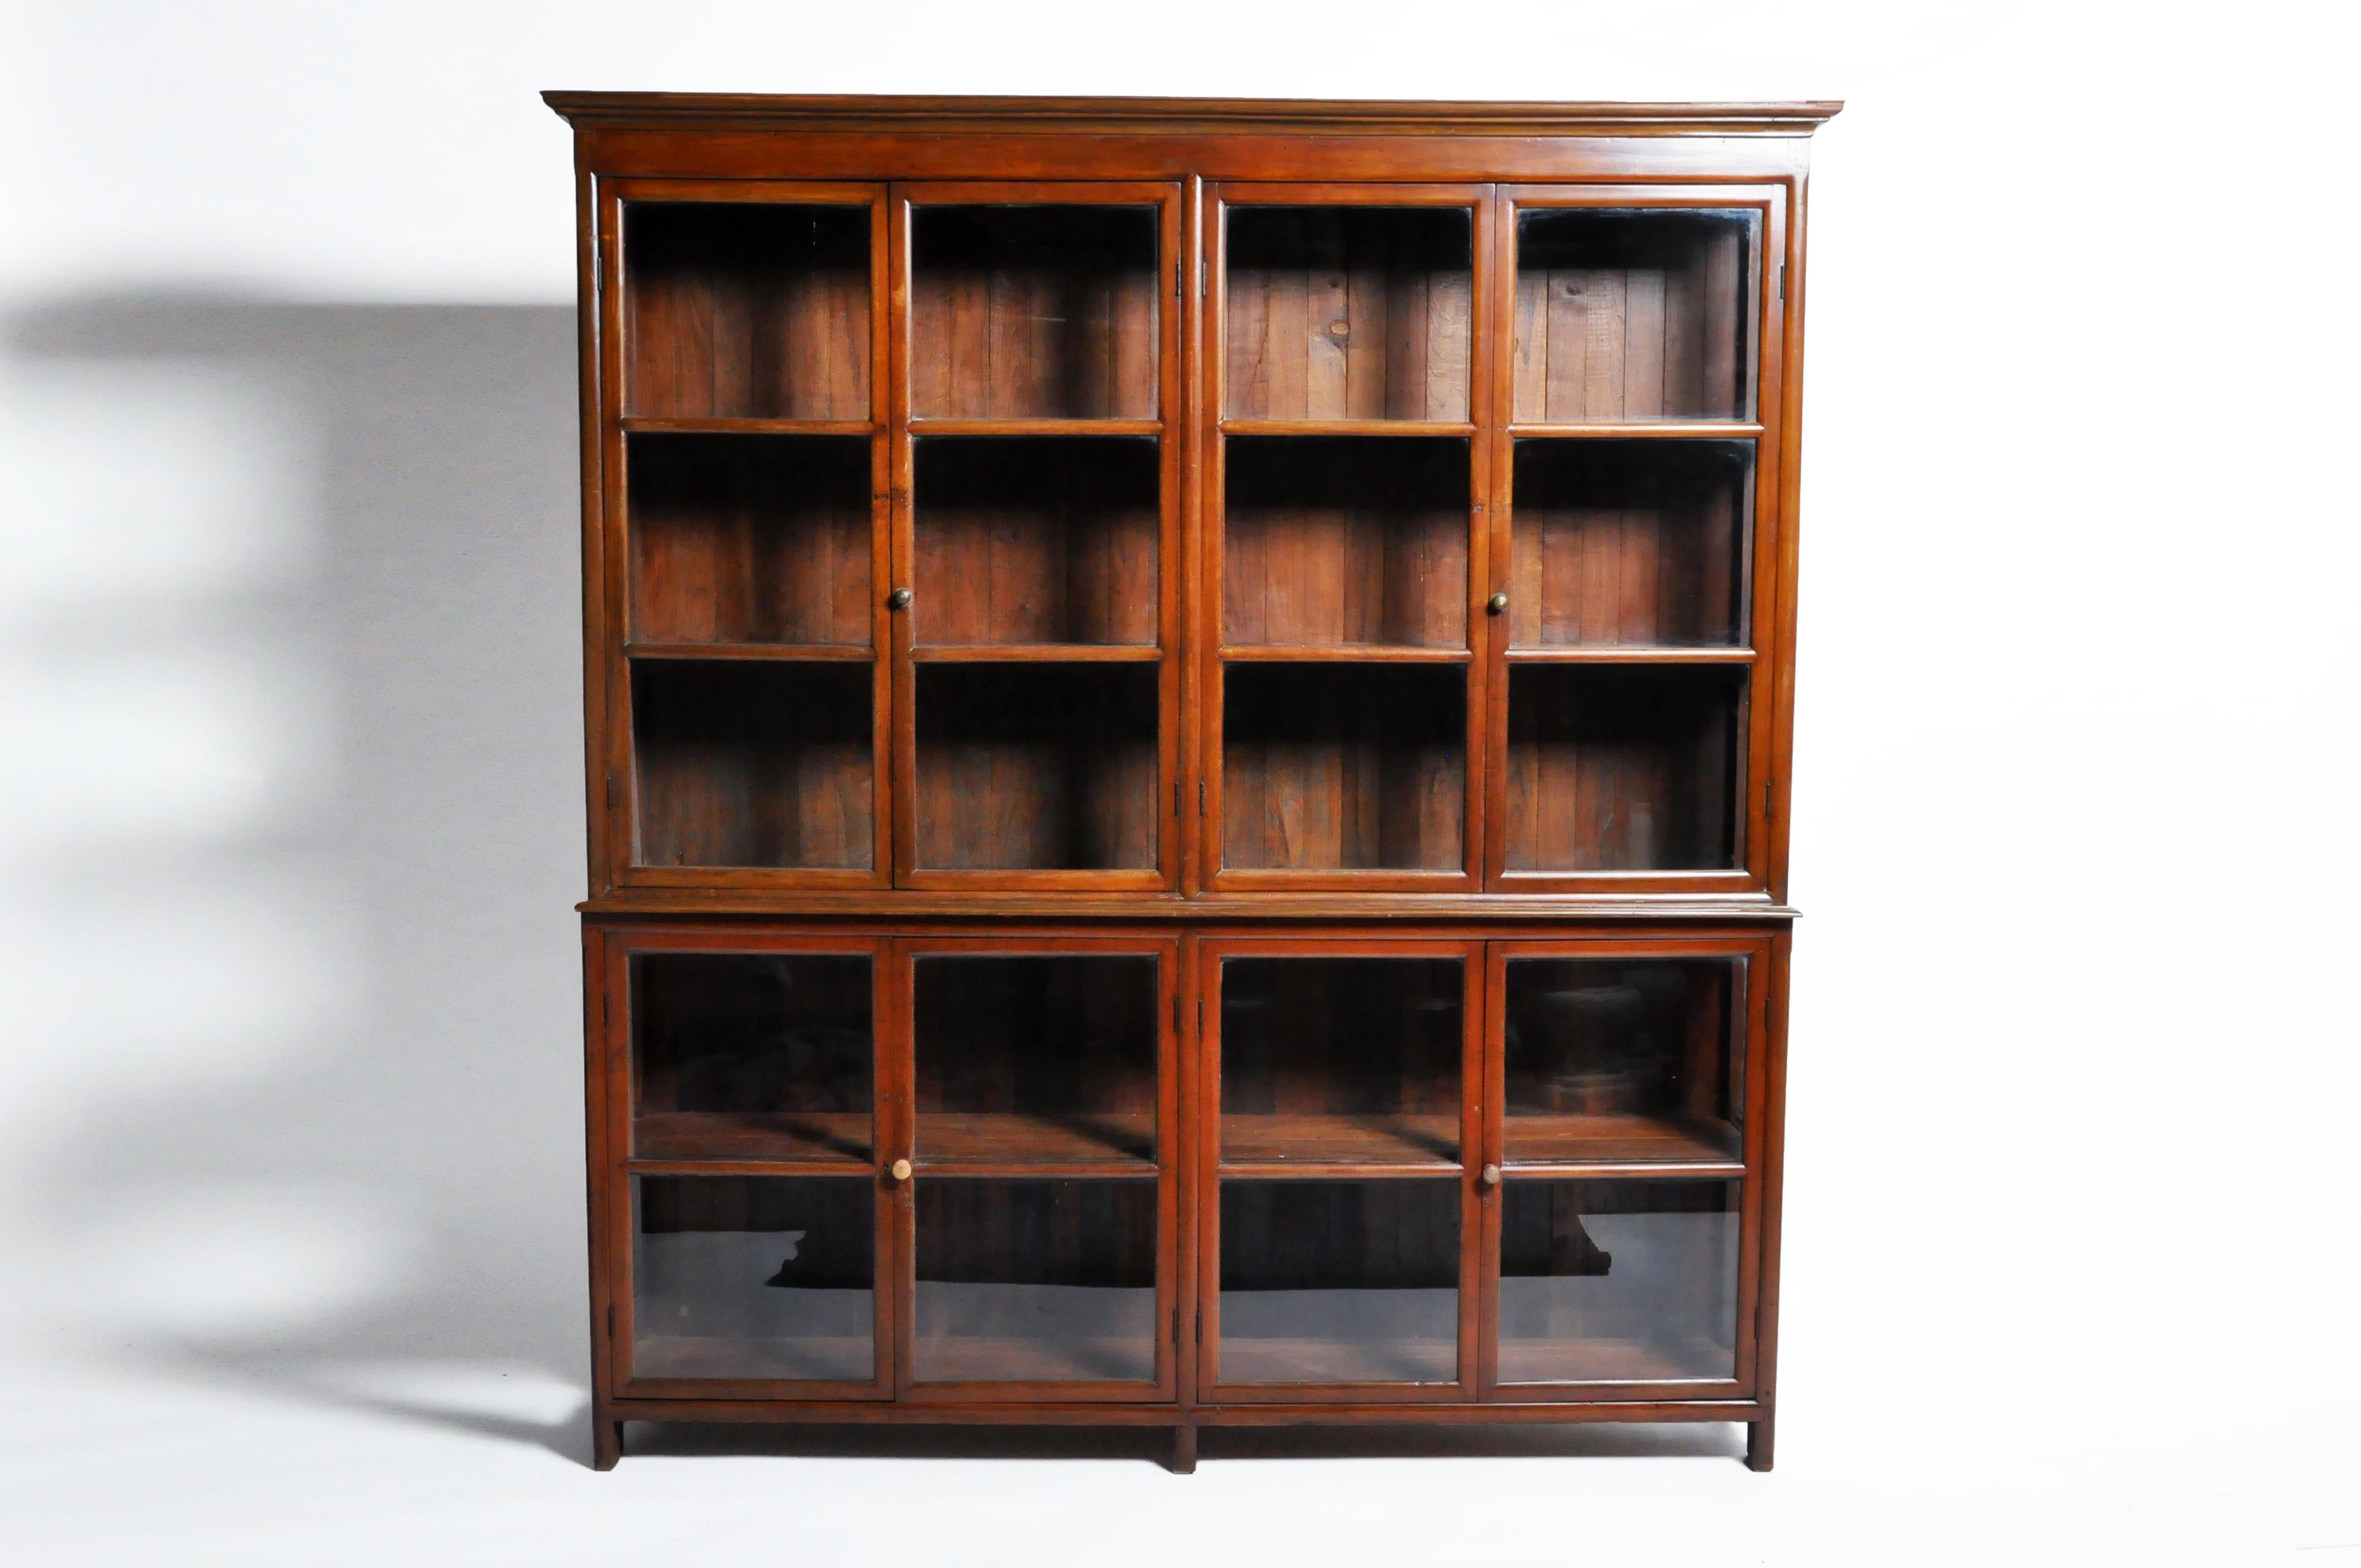 British Colonial Art Deco Breakfront Bookcase with Four Pairs of Doors 14